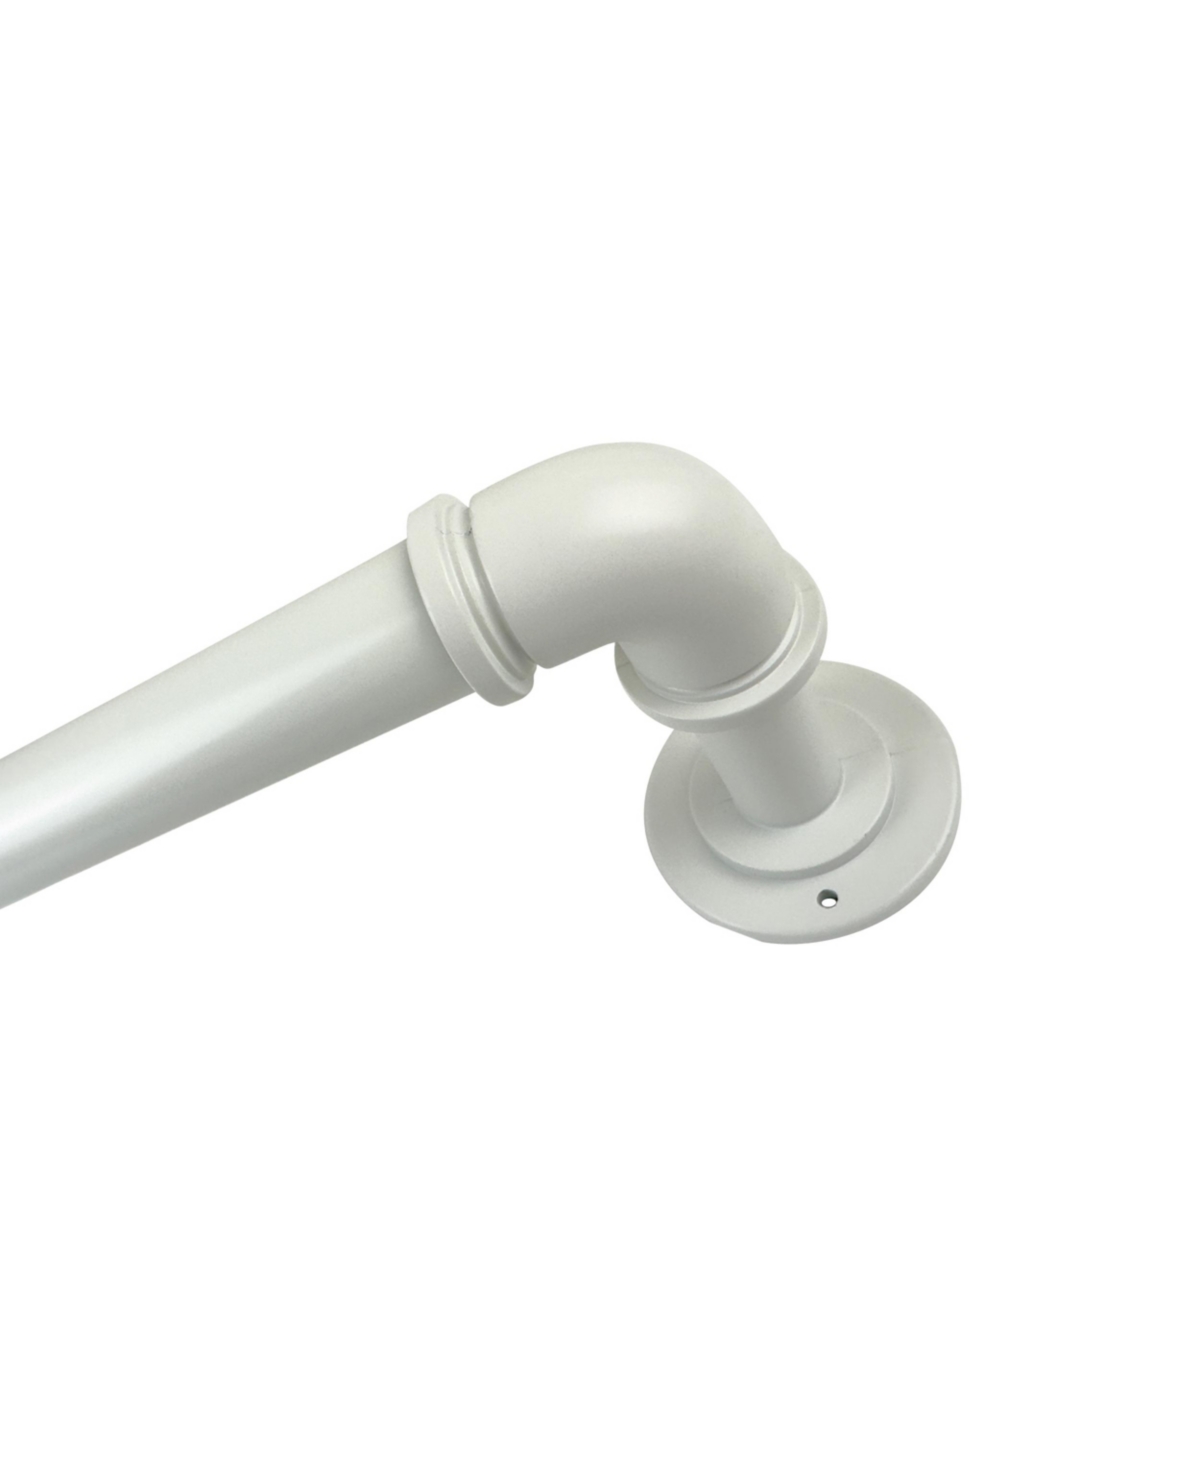 1" Pipe Blackout Curtain Rod 28-48" - White